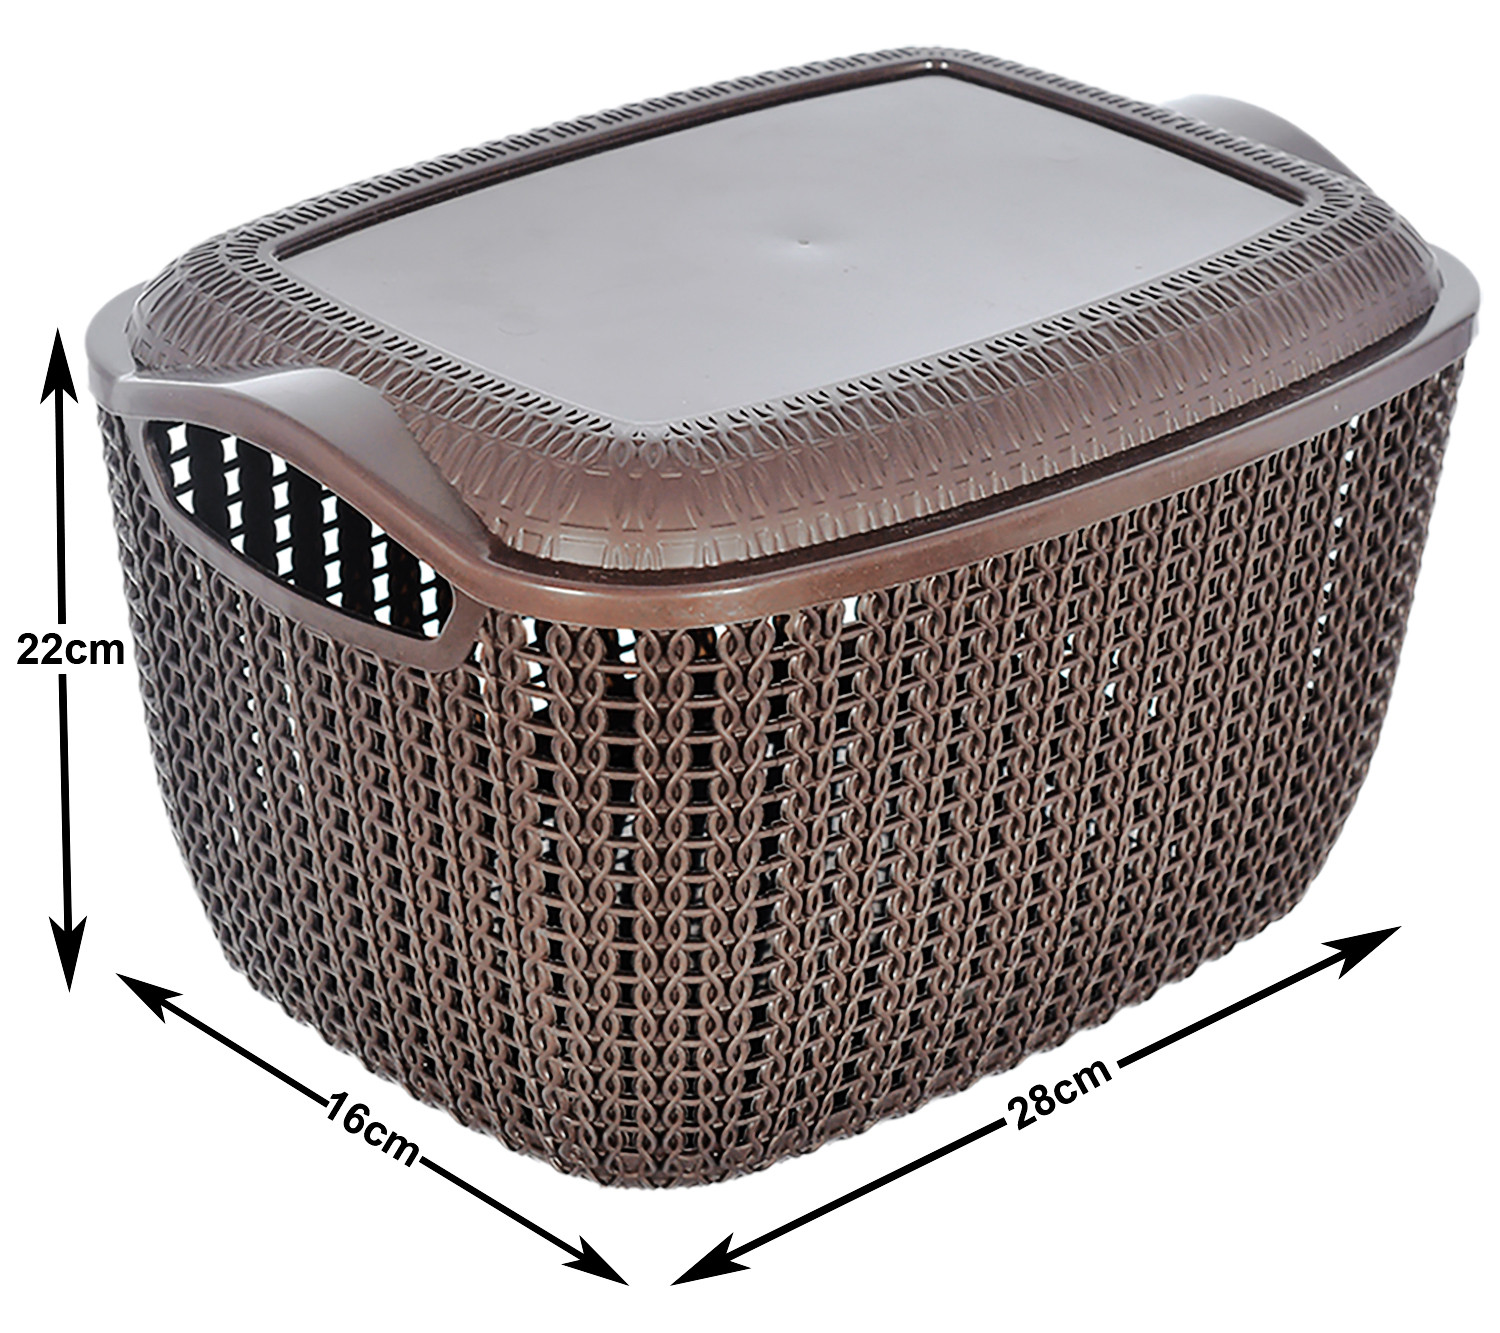 Kuber Industries Multiuses Large M 30 Plastic Basket/Organizer With Lid (Brown) -46KM05